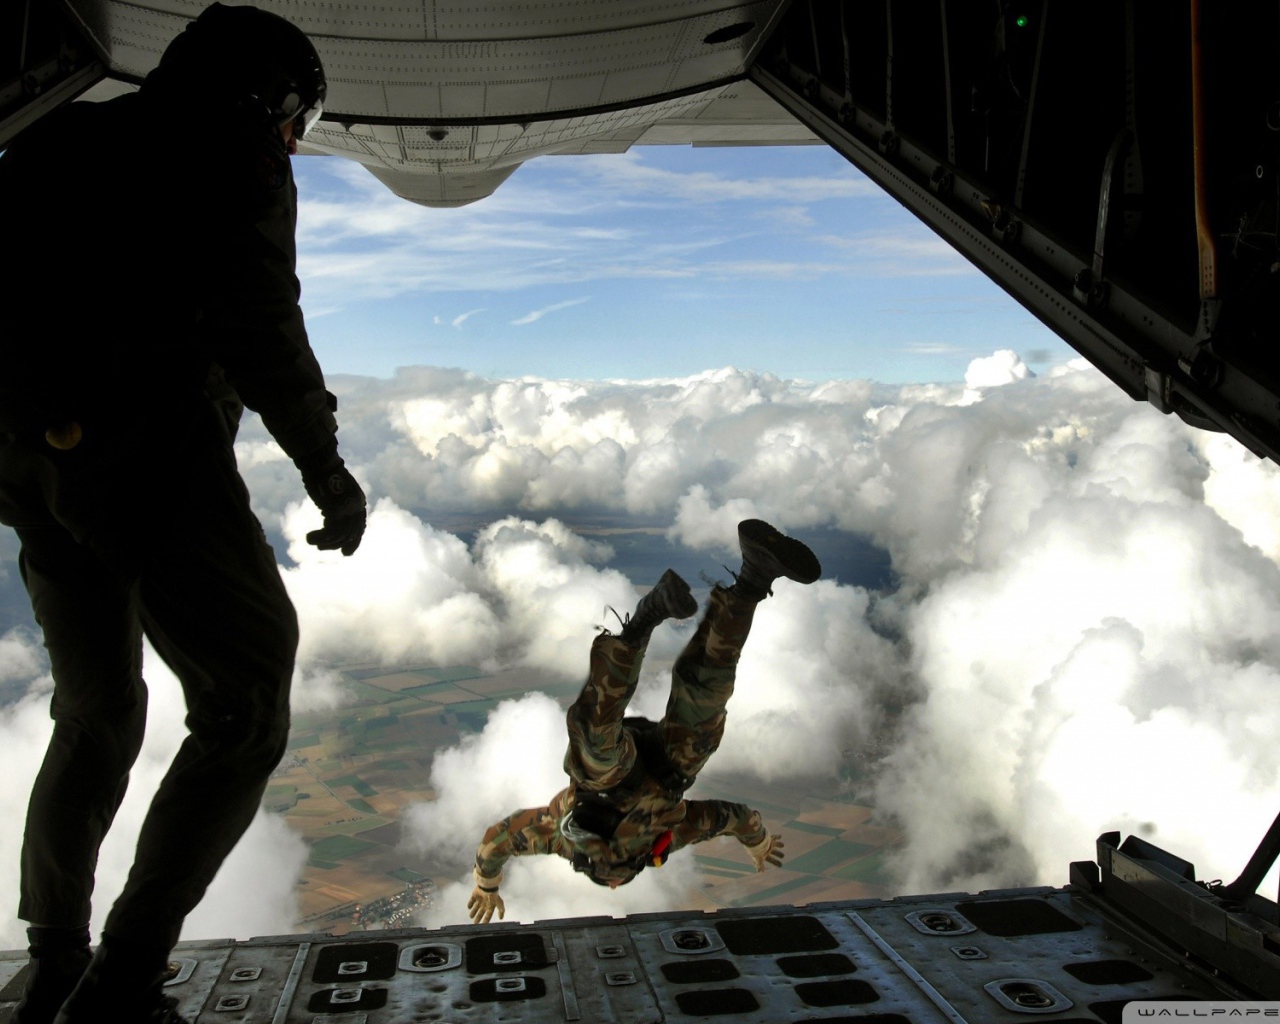 Paratroopers are jumping from an airplane